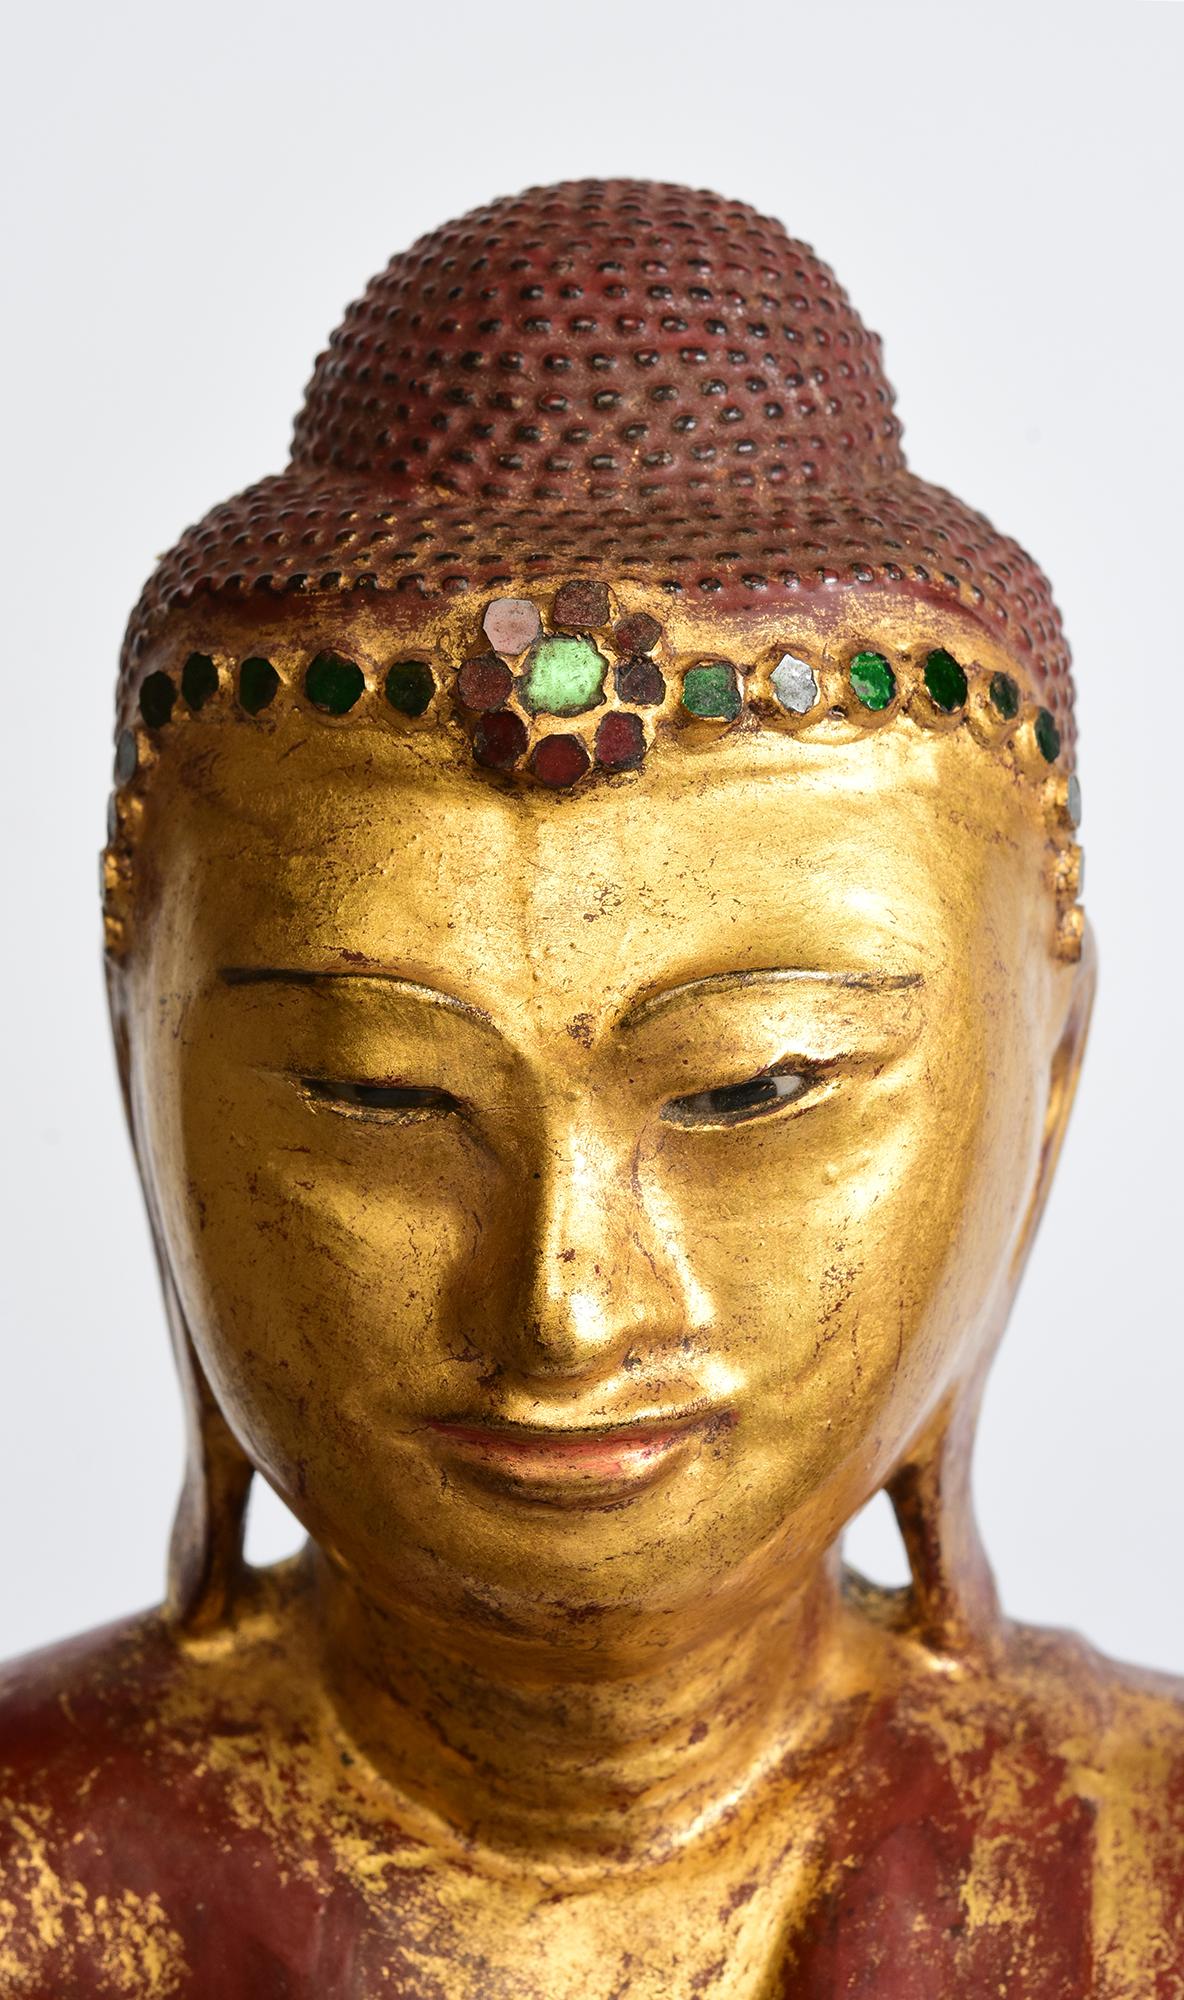 Antique Burmese wooden Buddha standing on a lotus base, with gilded gold and inlay of colorful glass pieces on the headband.

Age: Burma, Mandalay Period, 19th Century
Size: Height 52.2 C.M. / Width 25.3 C.M.
Height including stand: 71.2